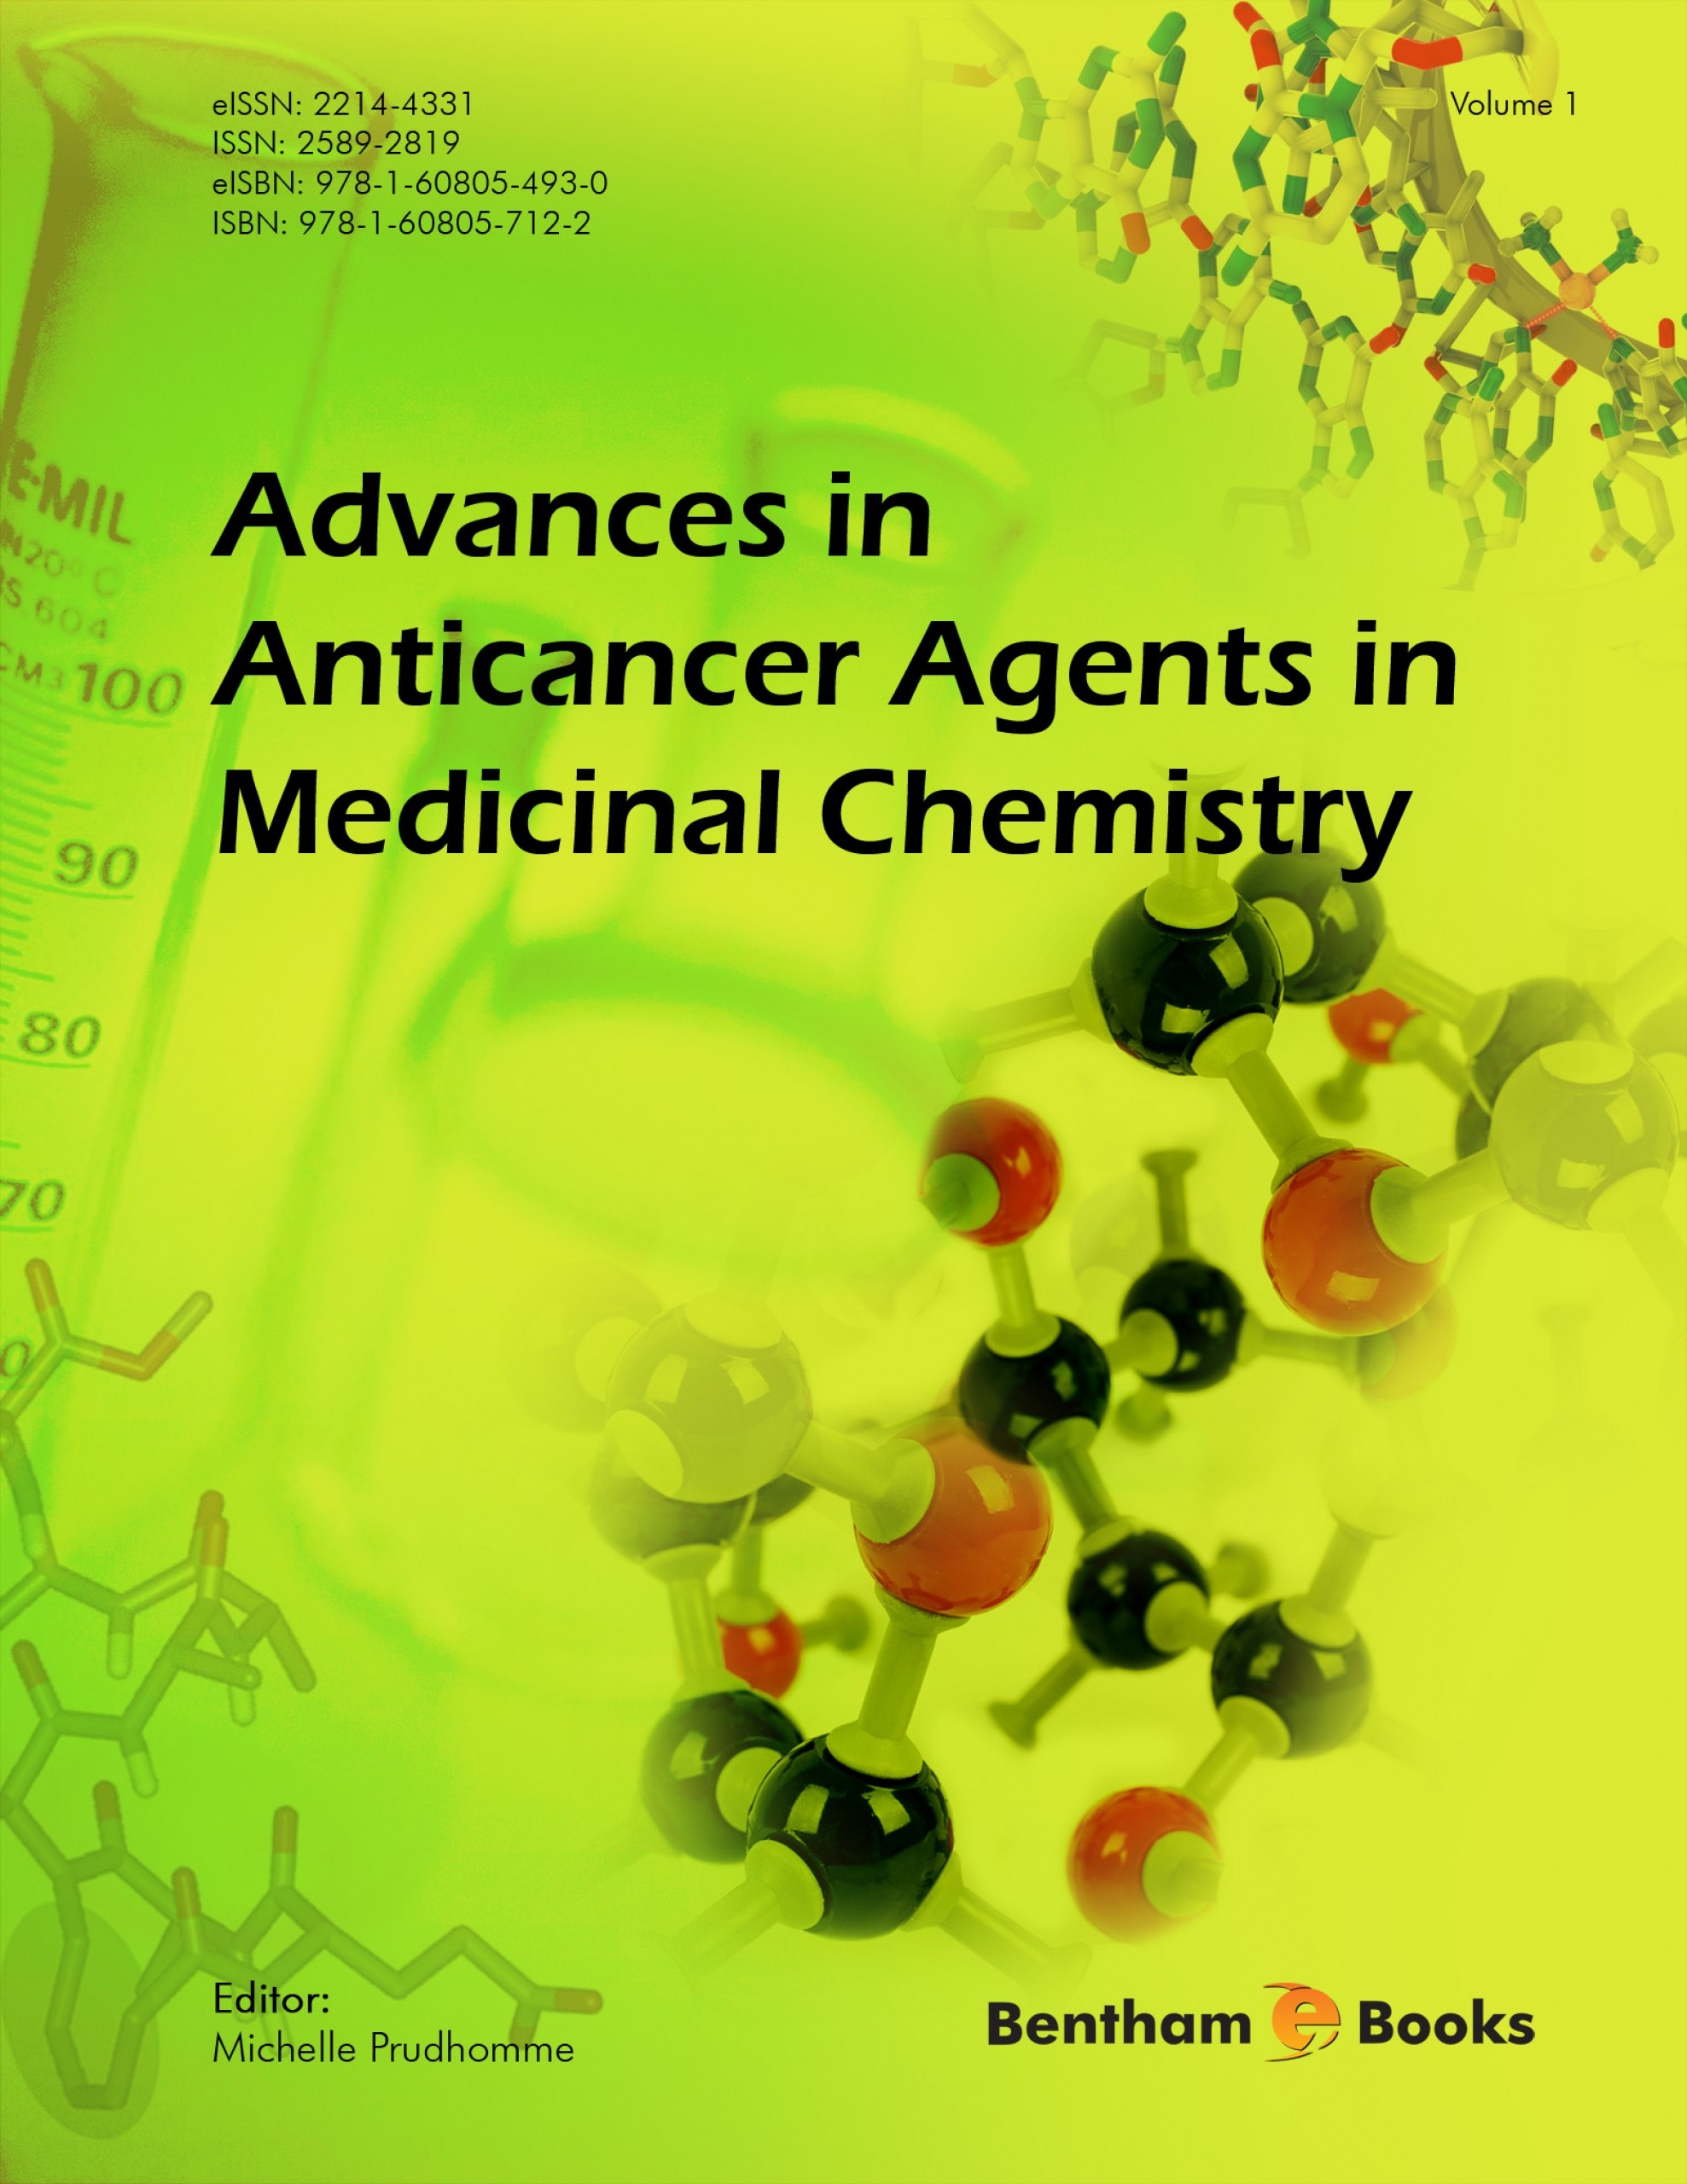 Advances in Anticancer Agents in Medicinal Chemistry: Volume 1